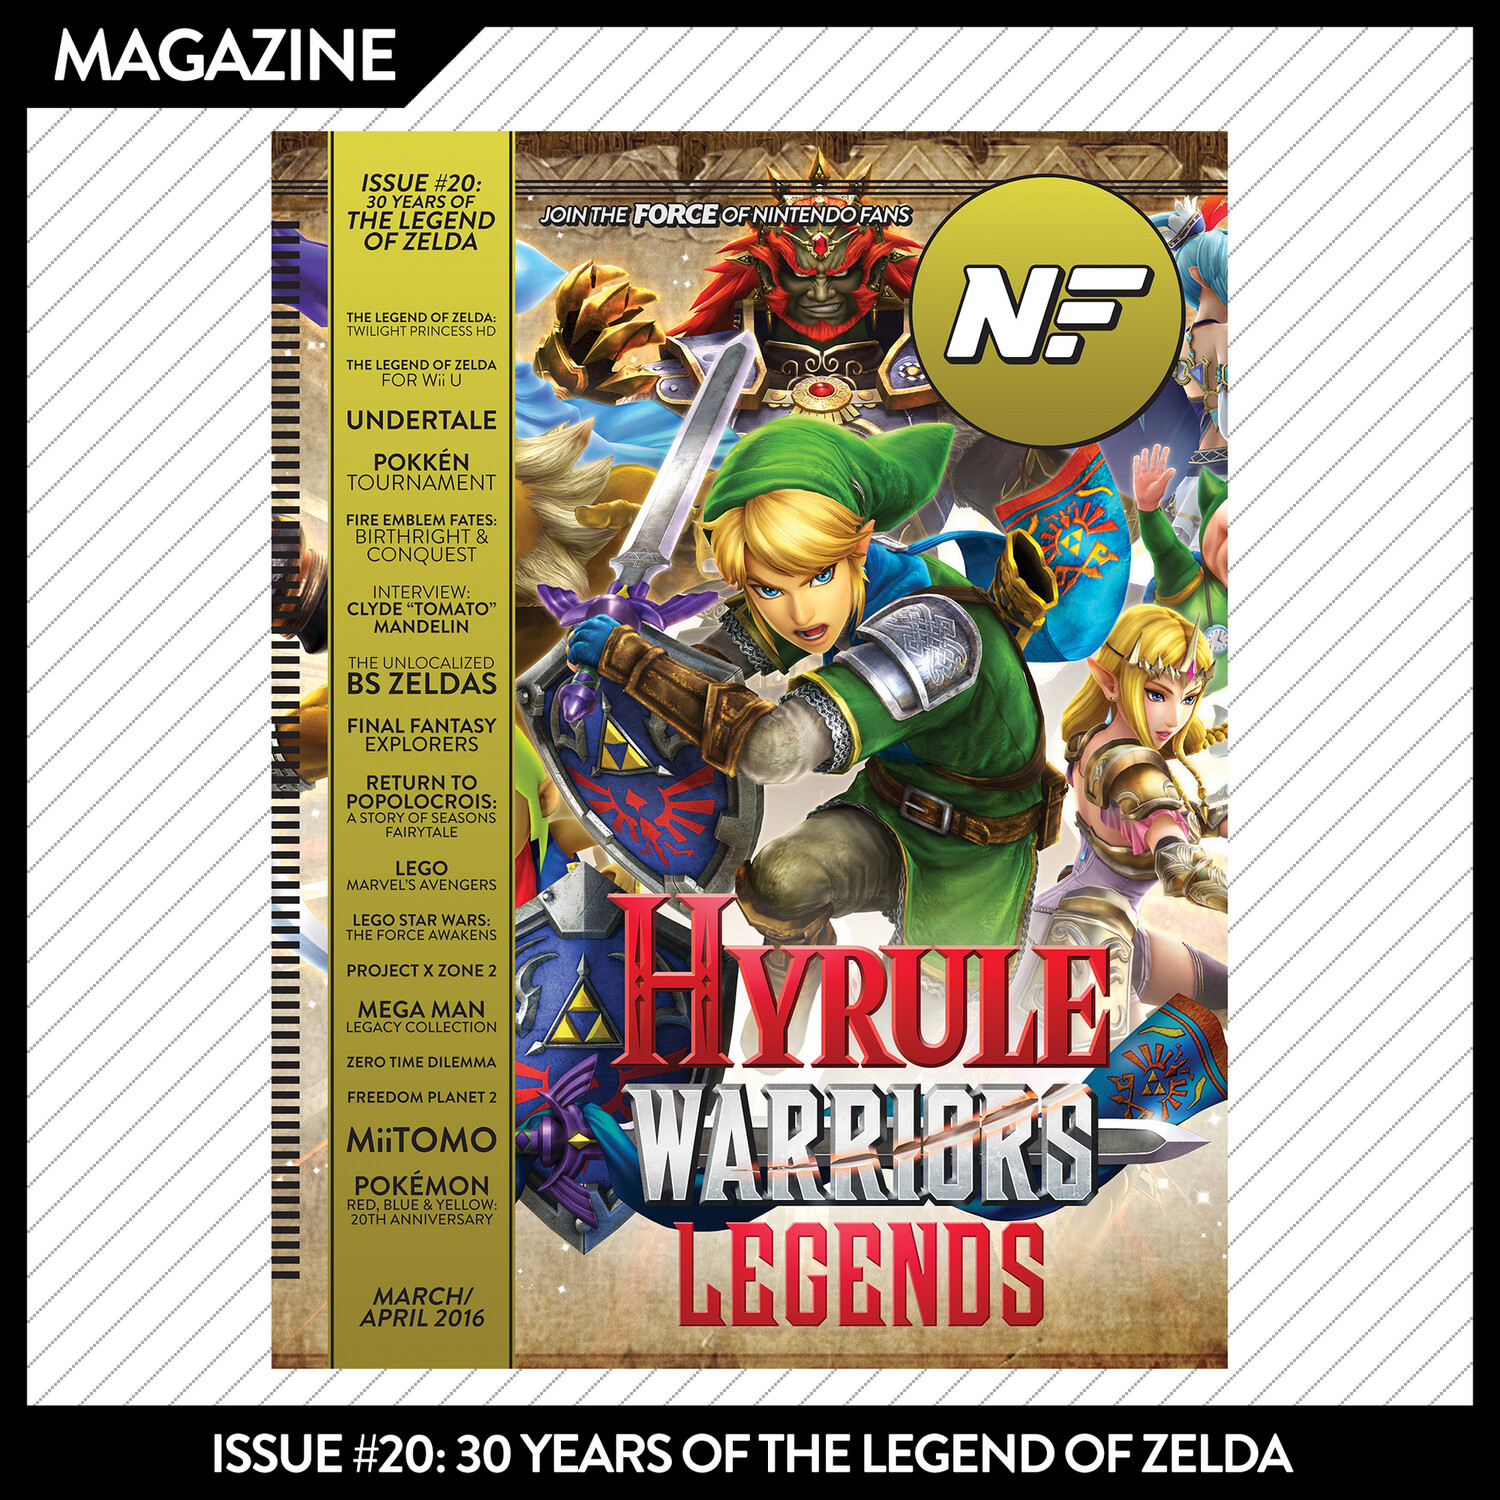 Issue #20: 30 Years of The Legend of Zelda – March/April 2016